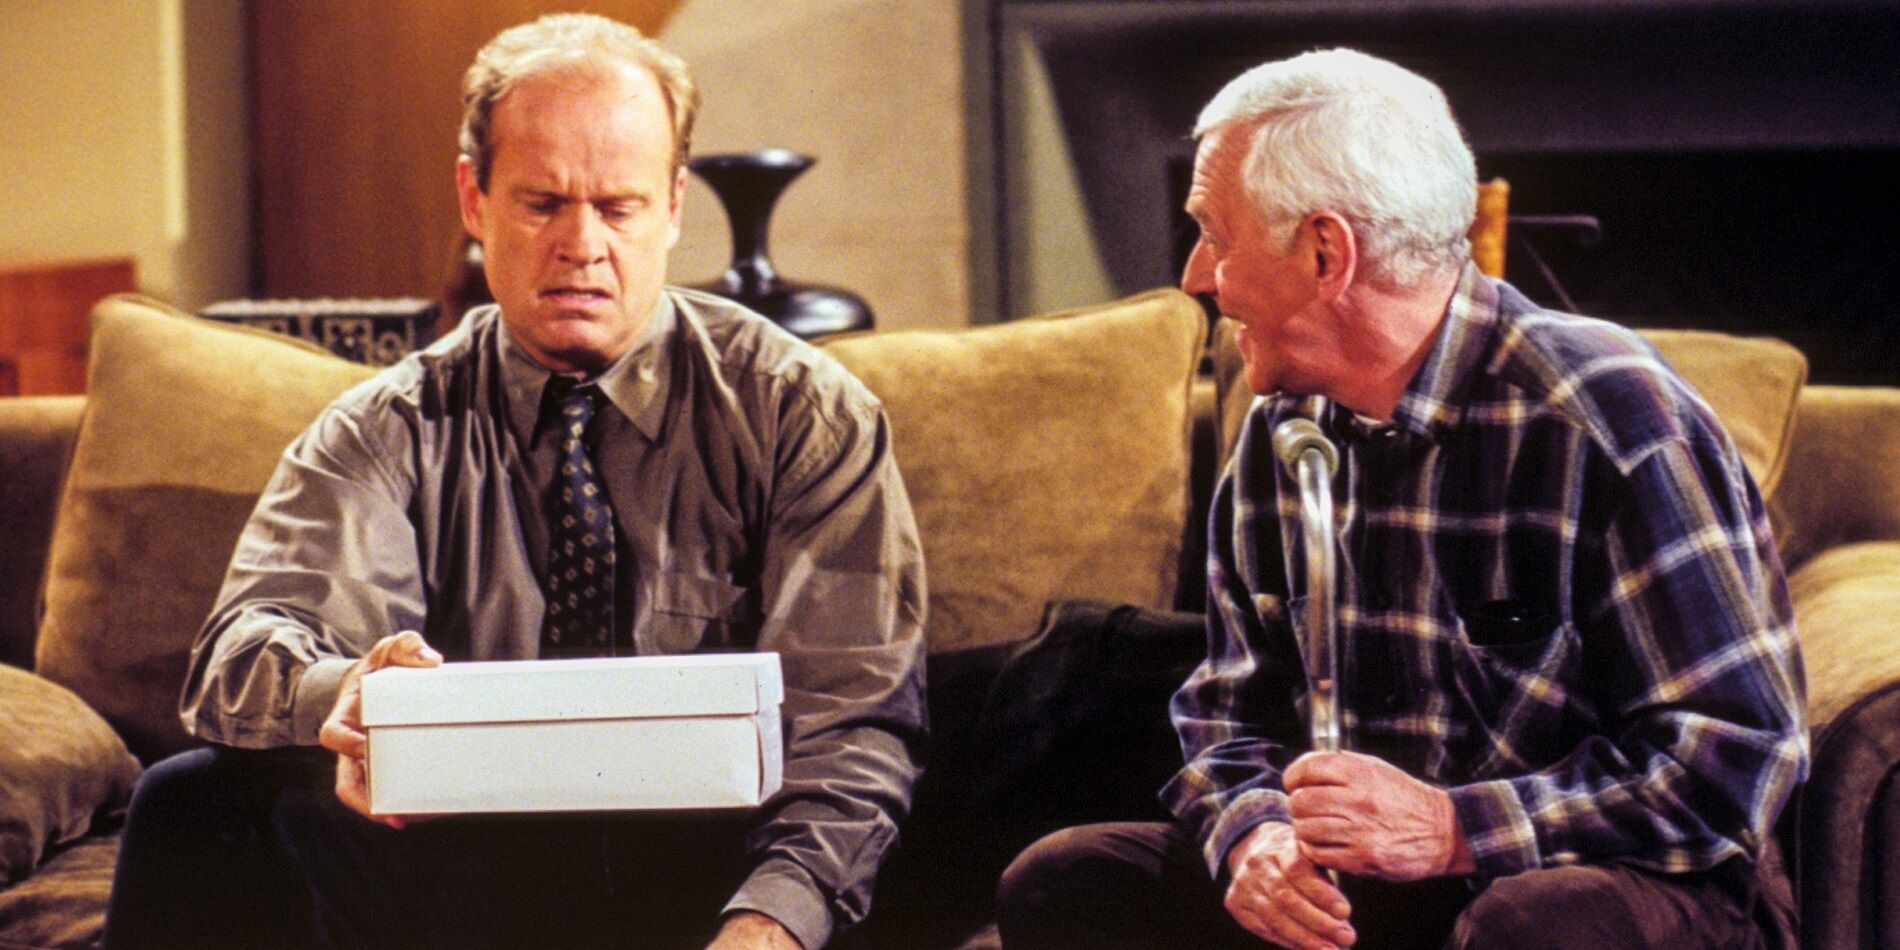 Frasier and Marty sit on the couch in Frasier